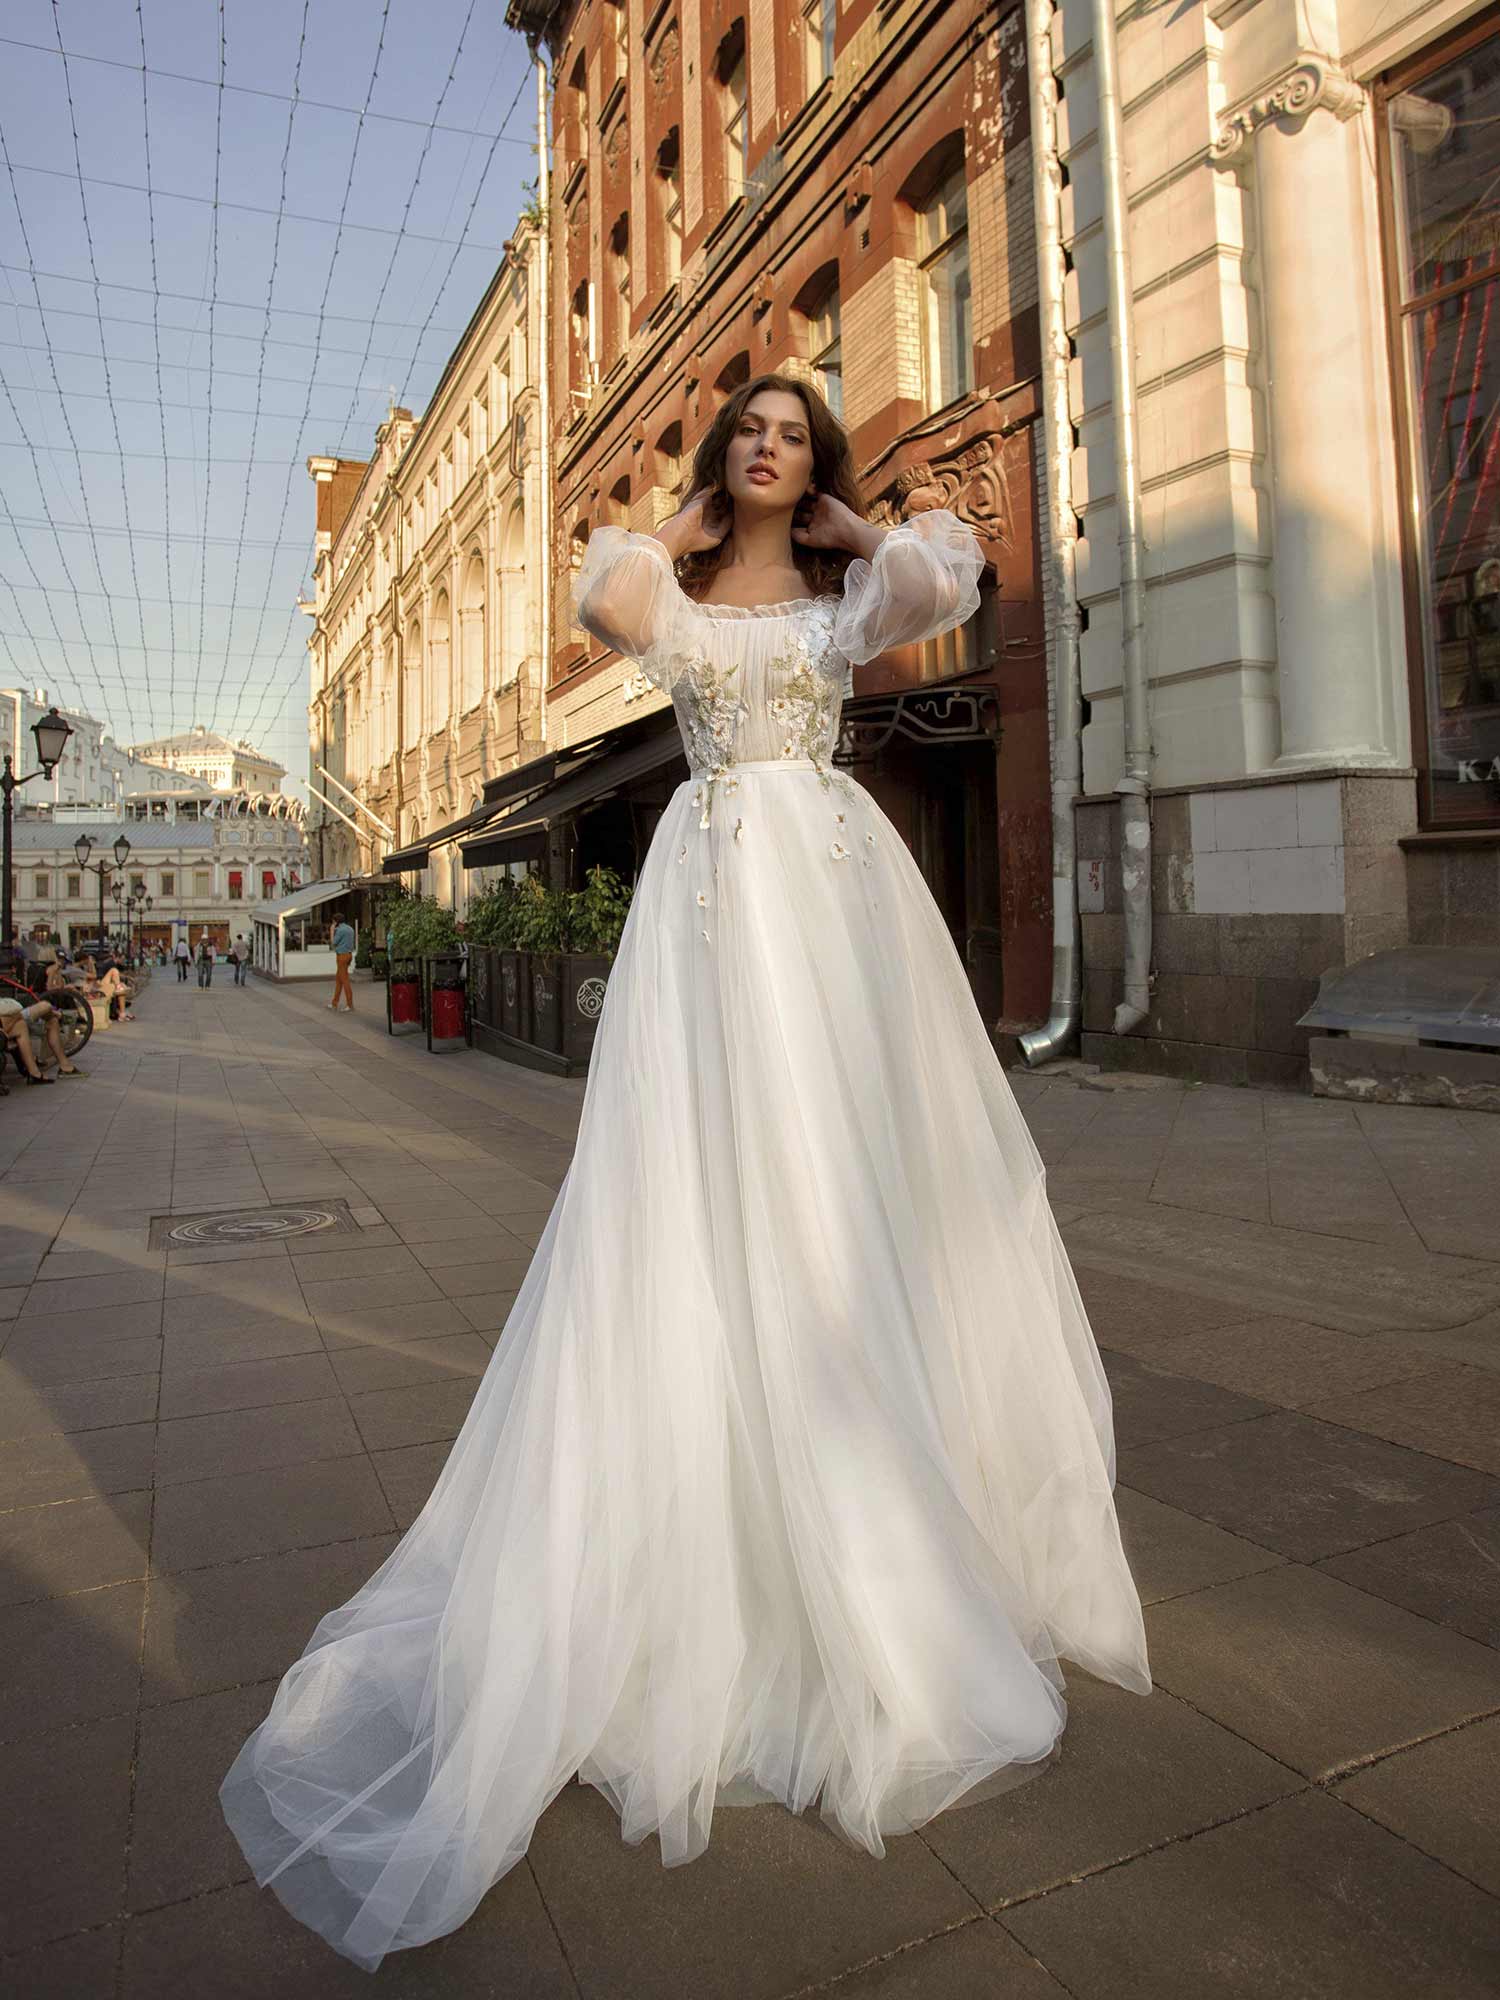 A-line wedding gown with an off-the-shoulder neckline, bishop sleeves, and  floral appliqué